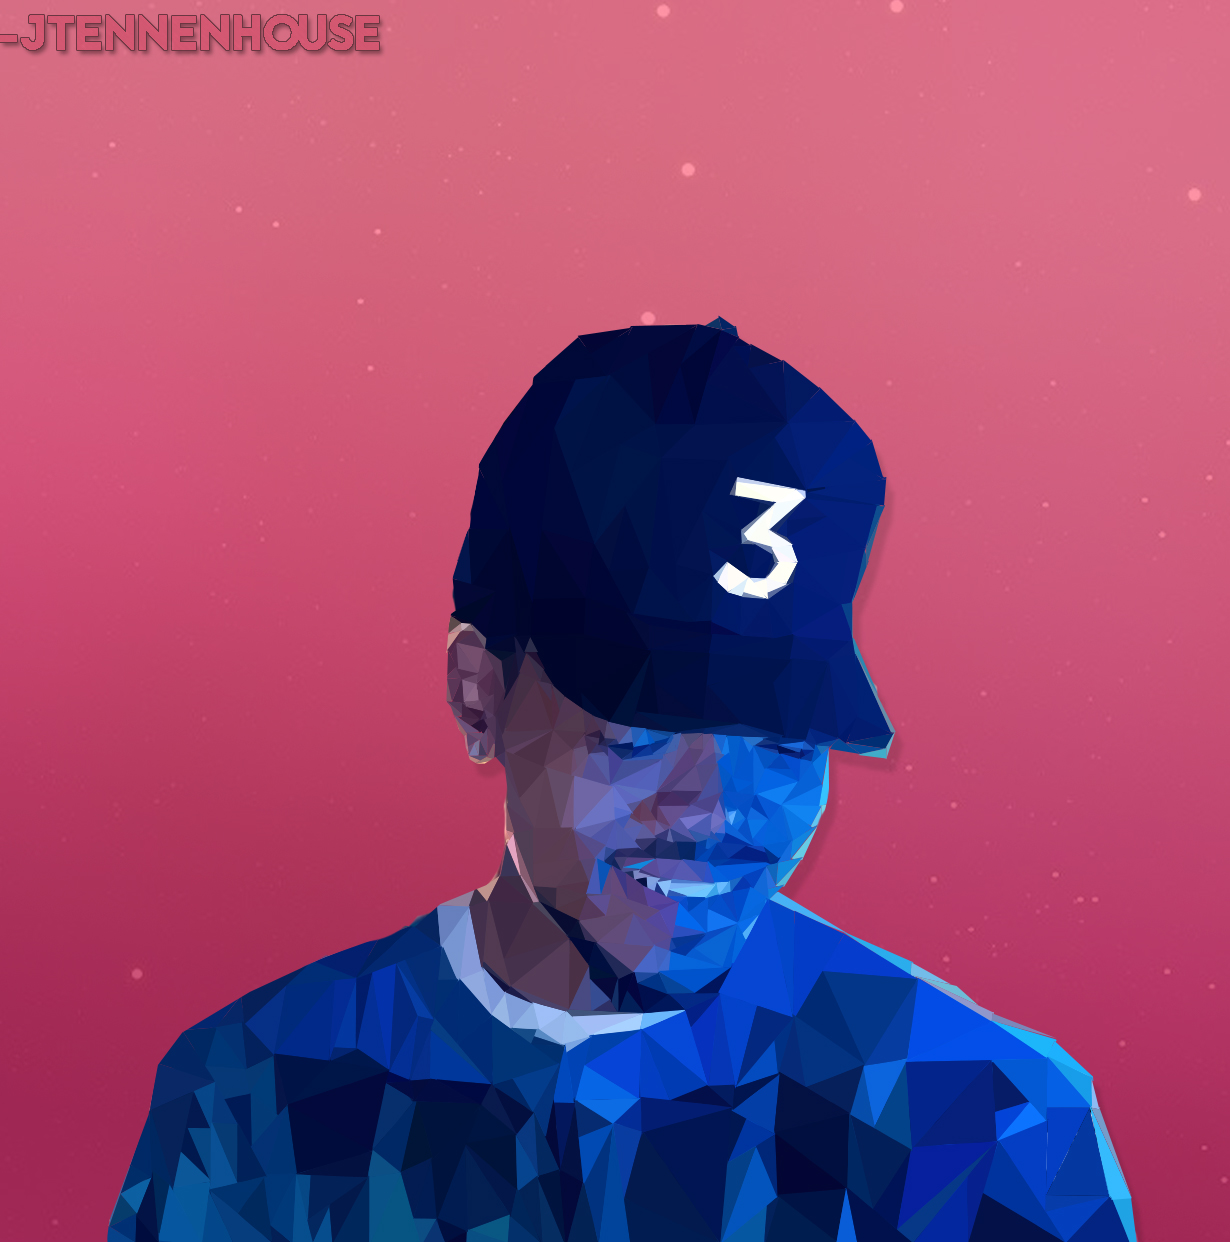 Low Poly Chance The Rapper by JTennenhouse on DeviantArt